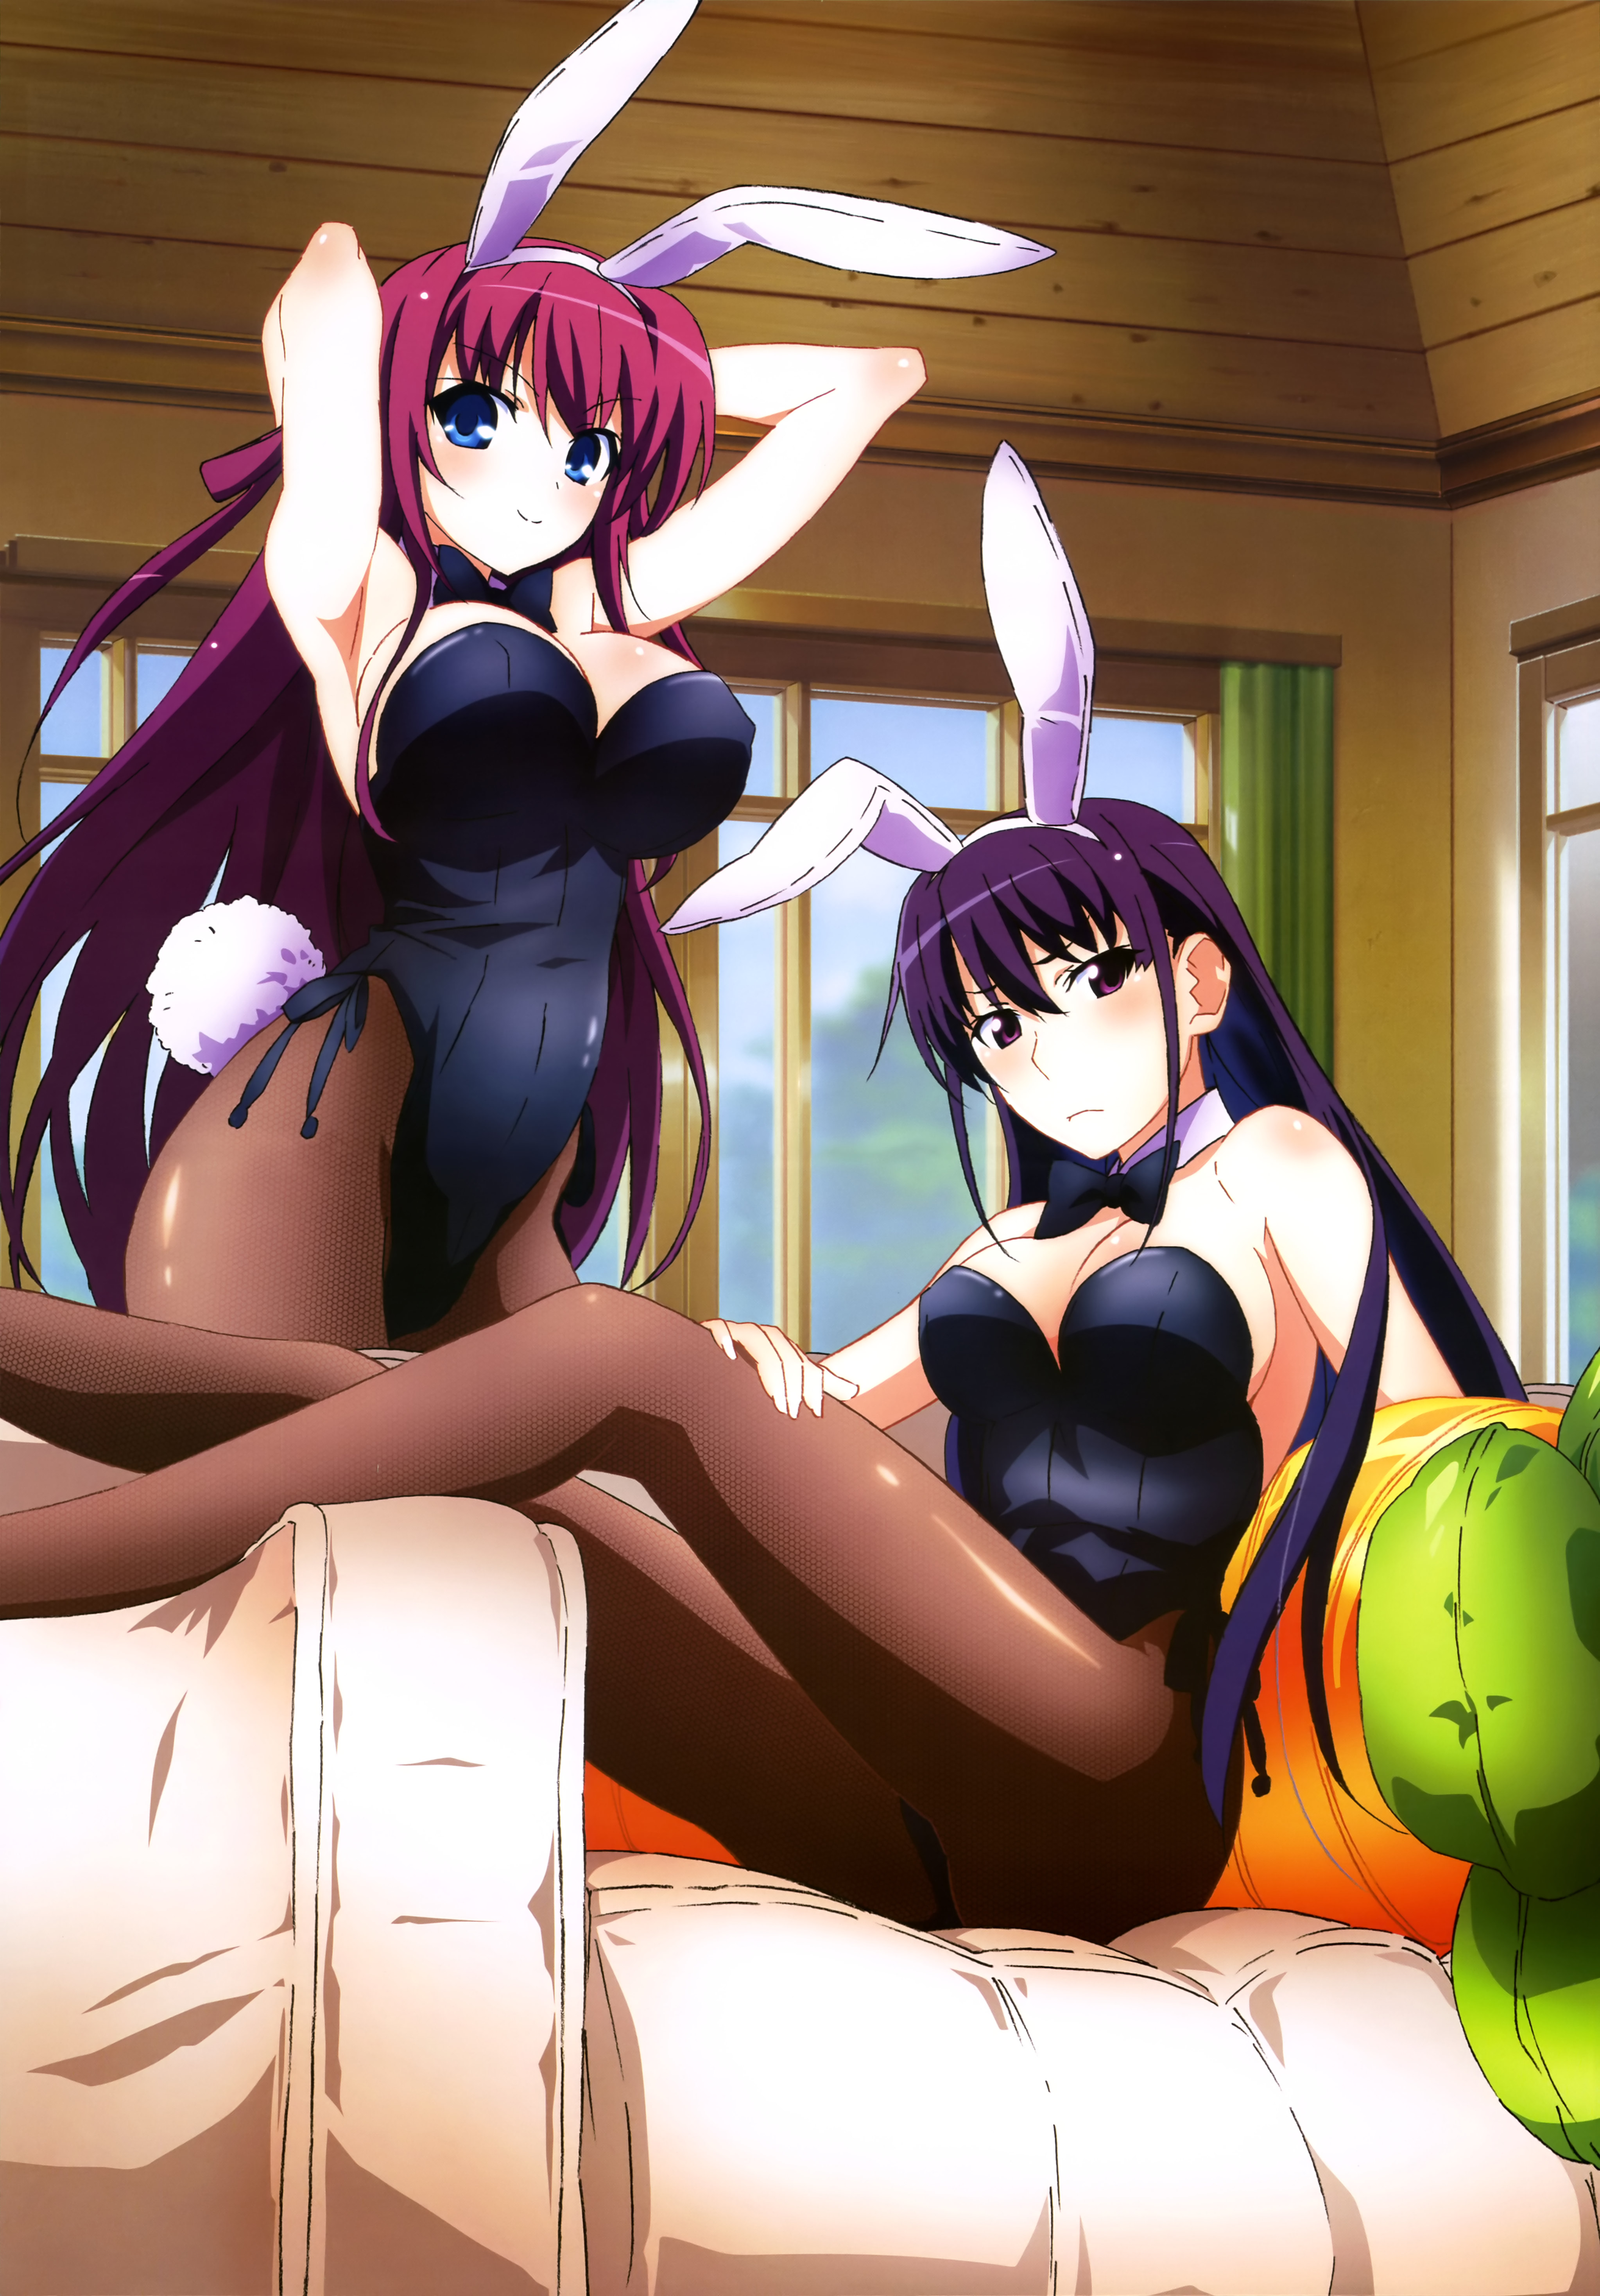 The Eden of Grisaia, The Labyrinth of Grisaia Anime Begin With 60